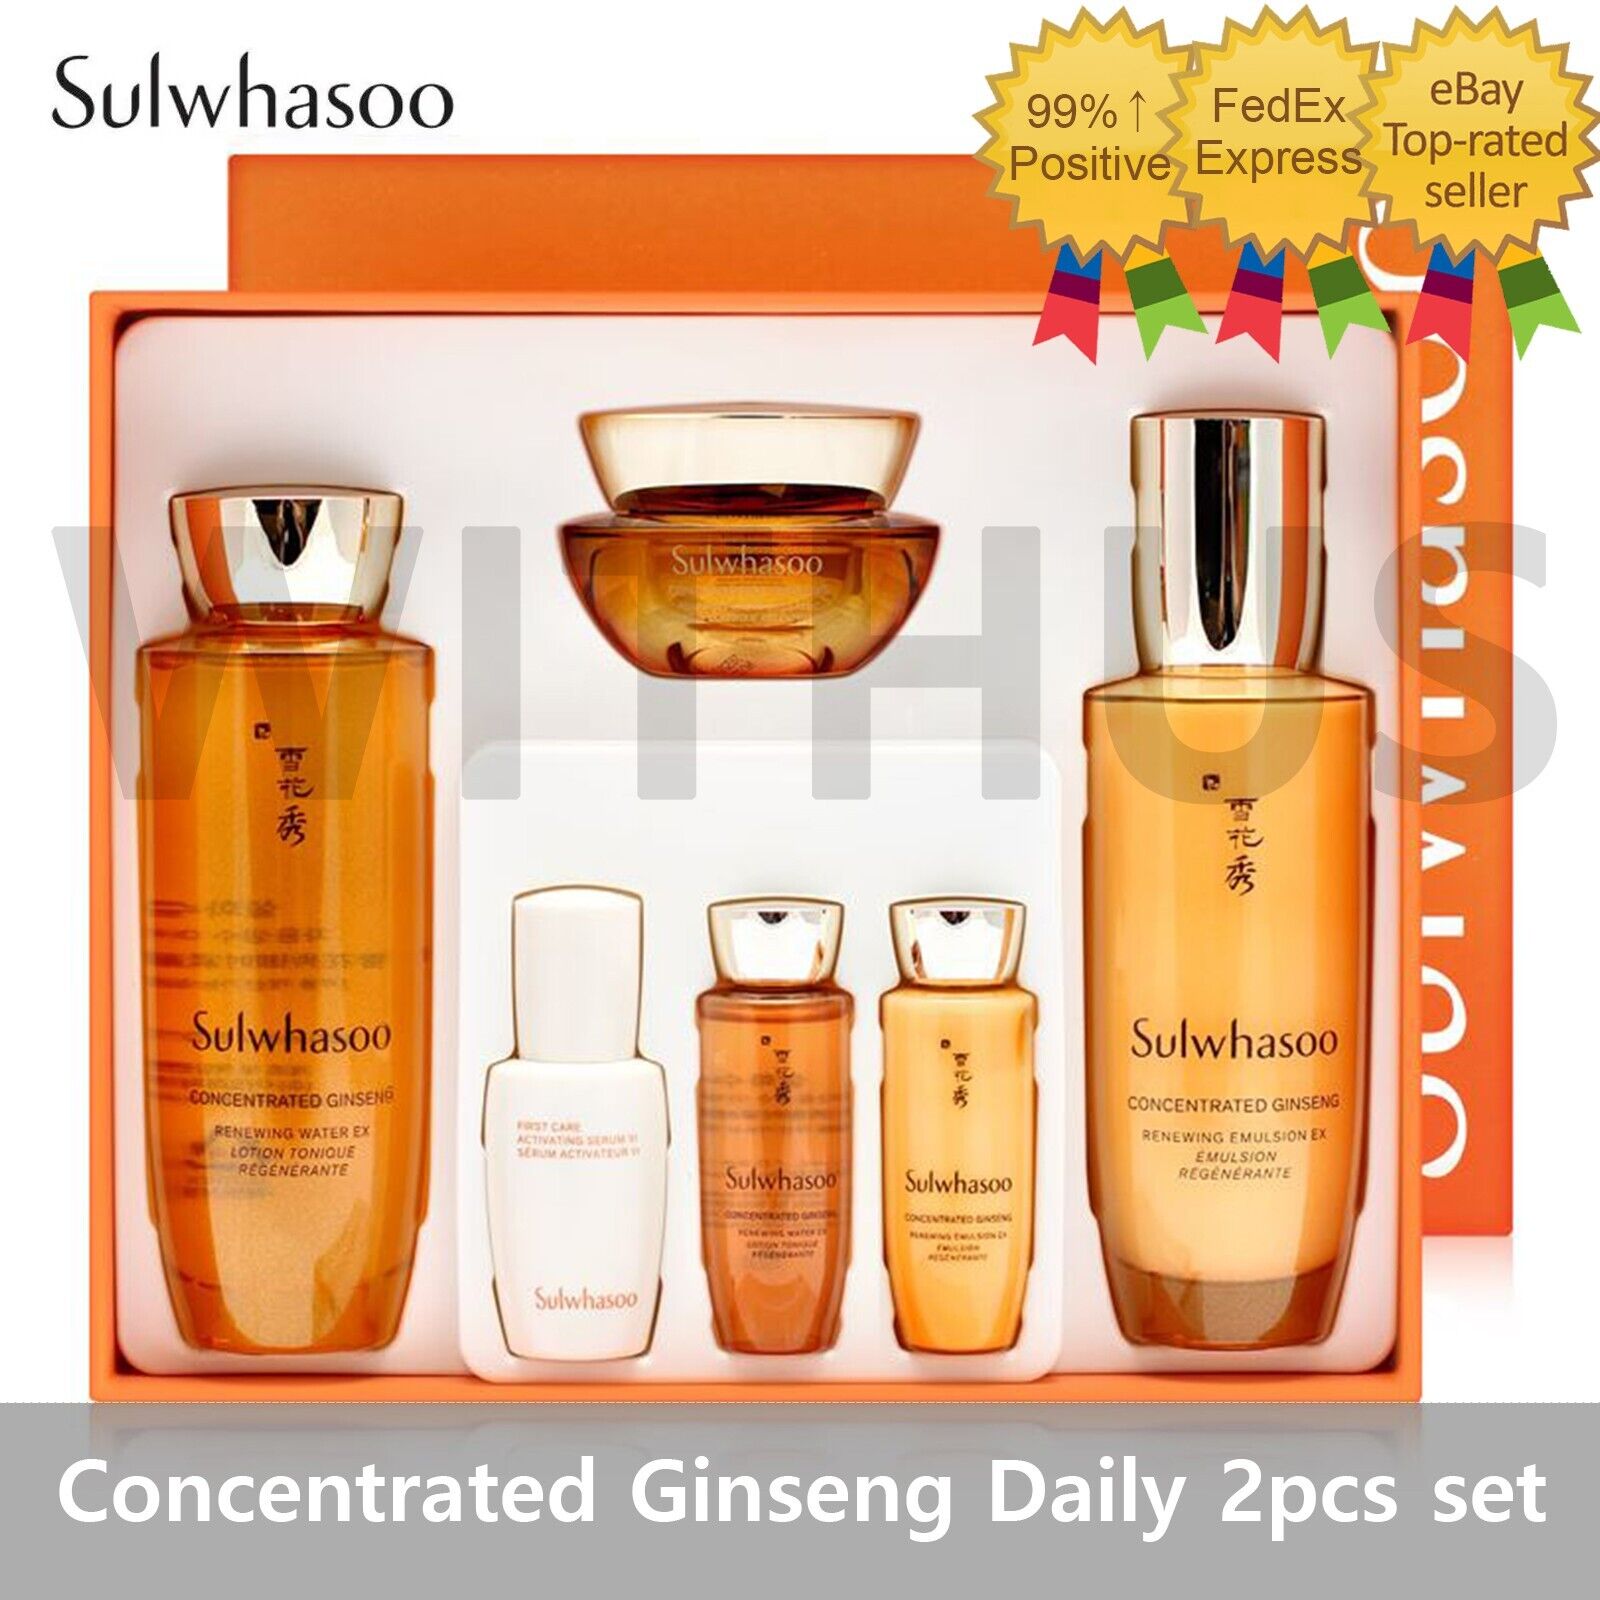 Sulwhasoo Concentrated Ginseng Daily Routine 2pcs set Emulsion Toner Travel Kit